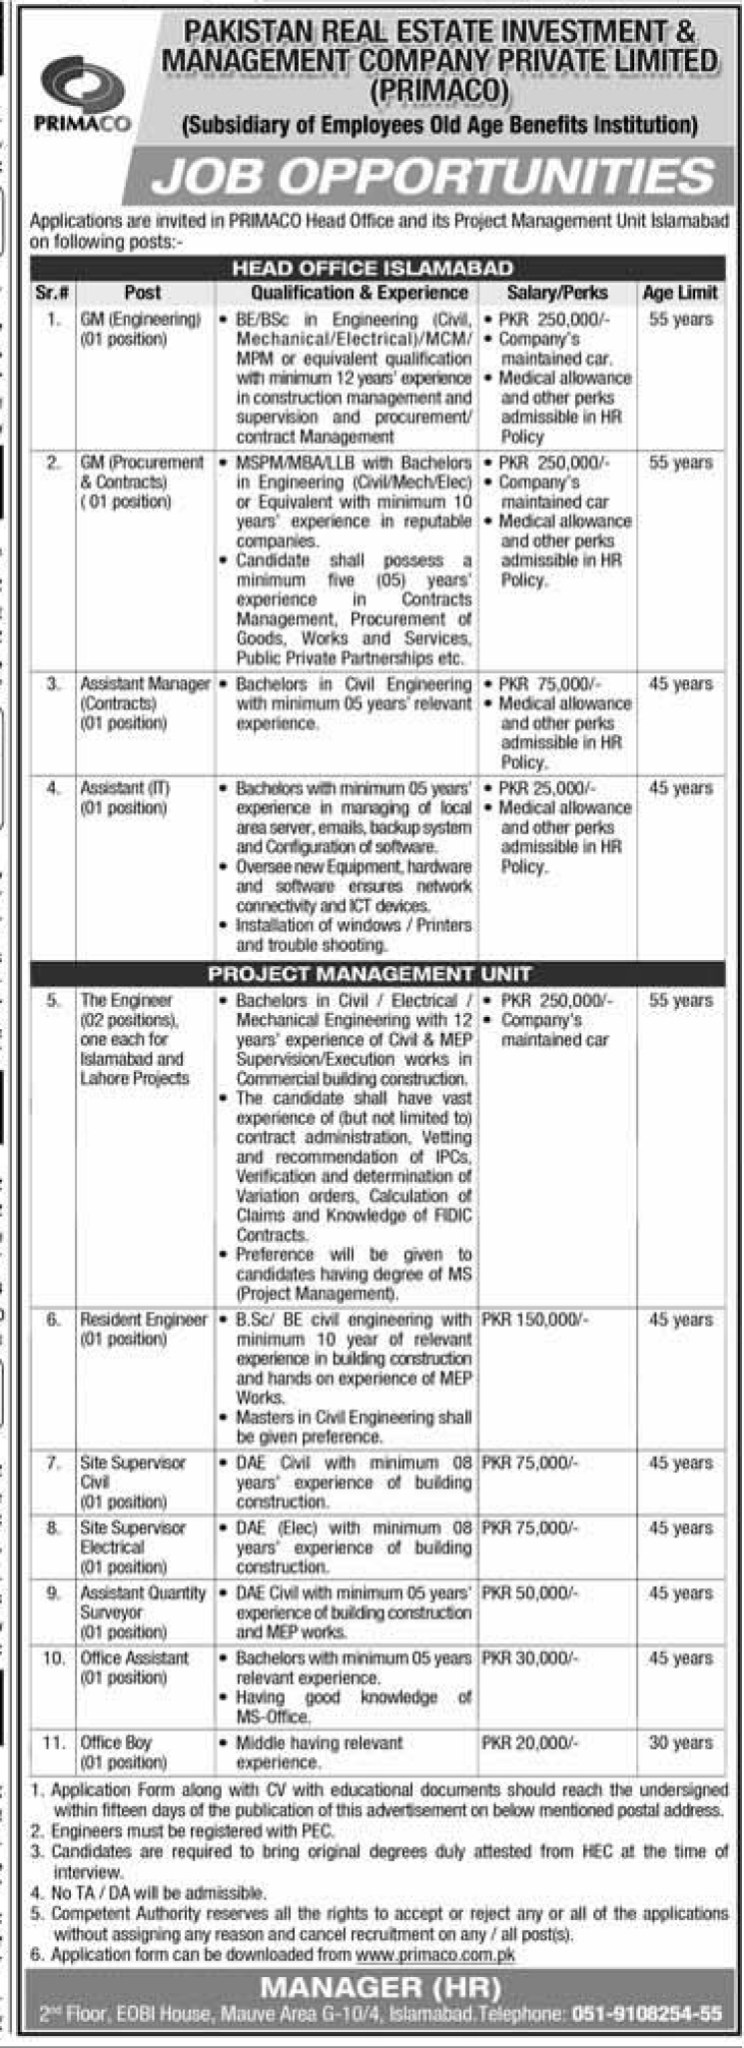 Pakistan Real Estate Investment & Management Company PRIMACO Jobs 2021